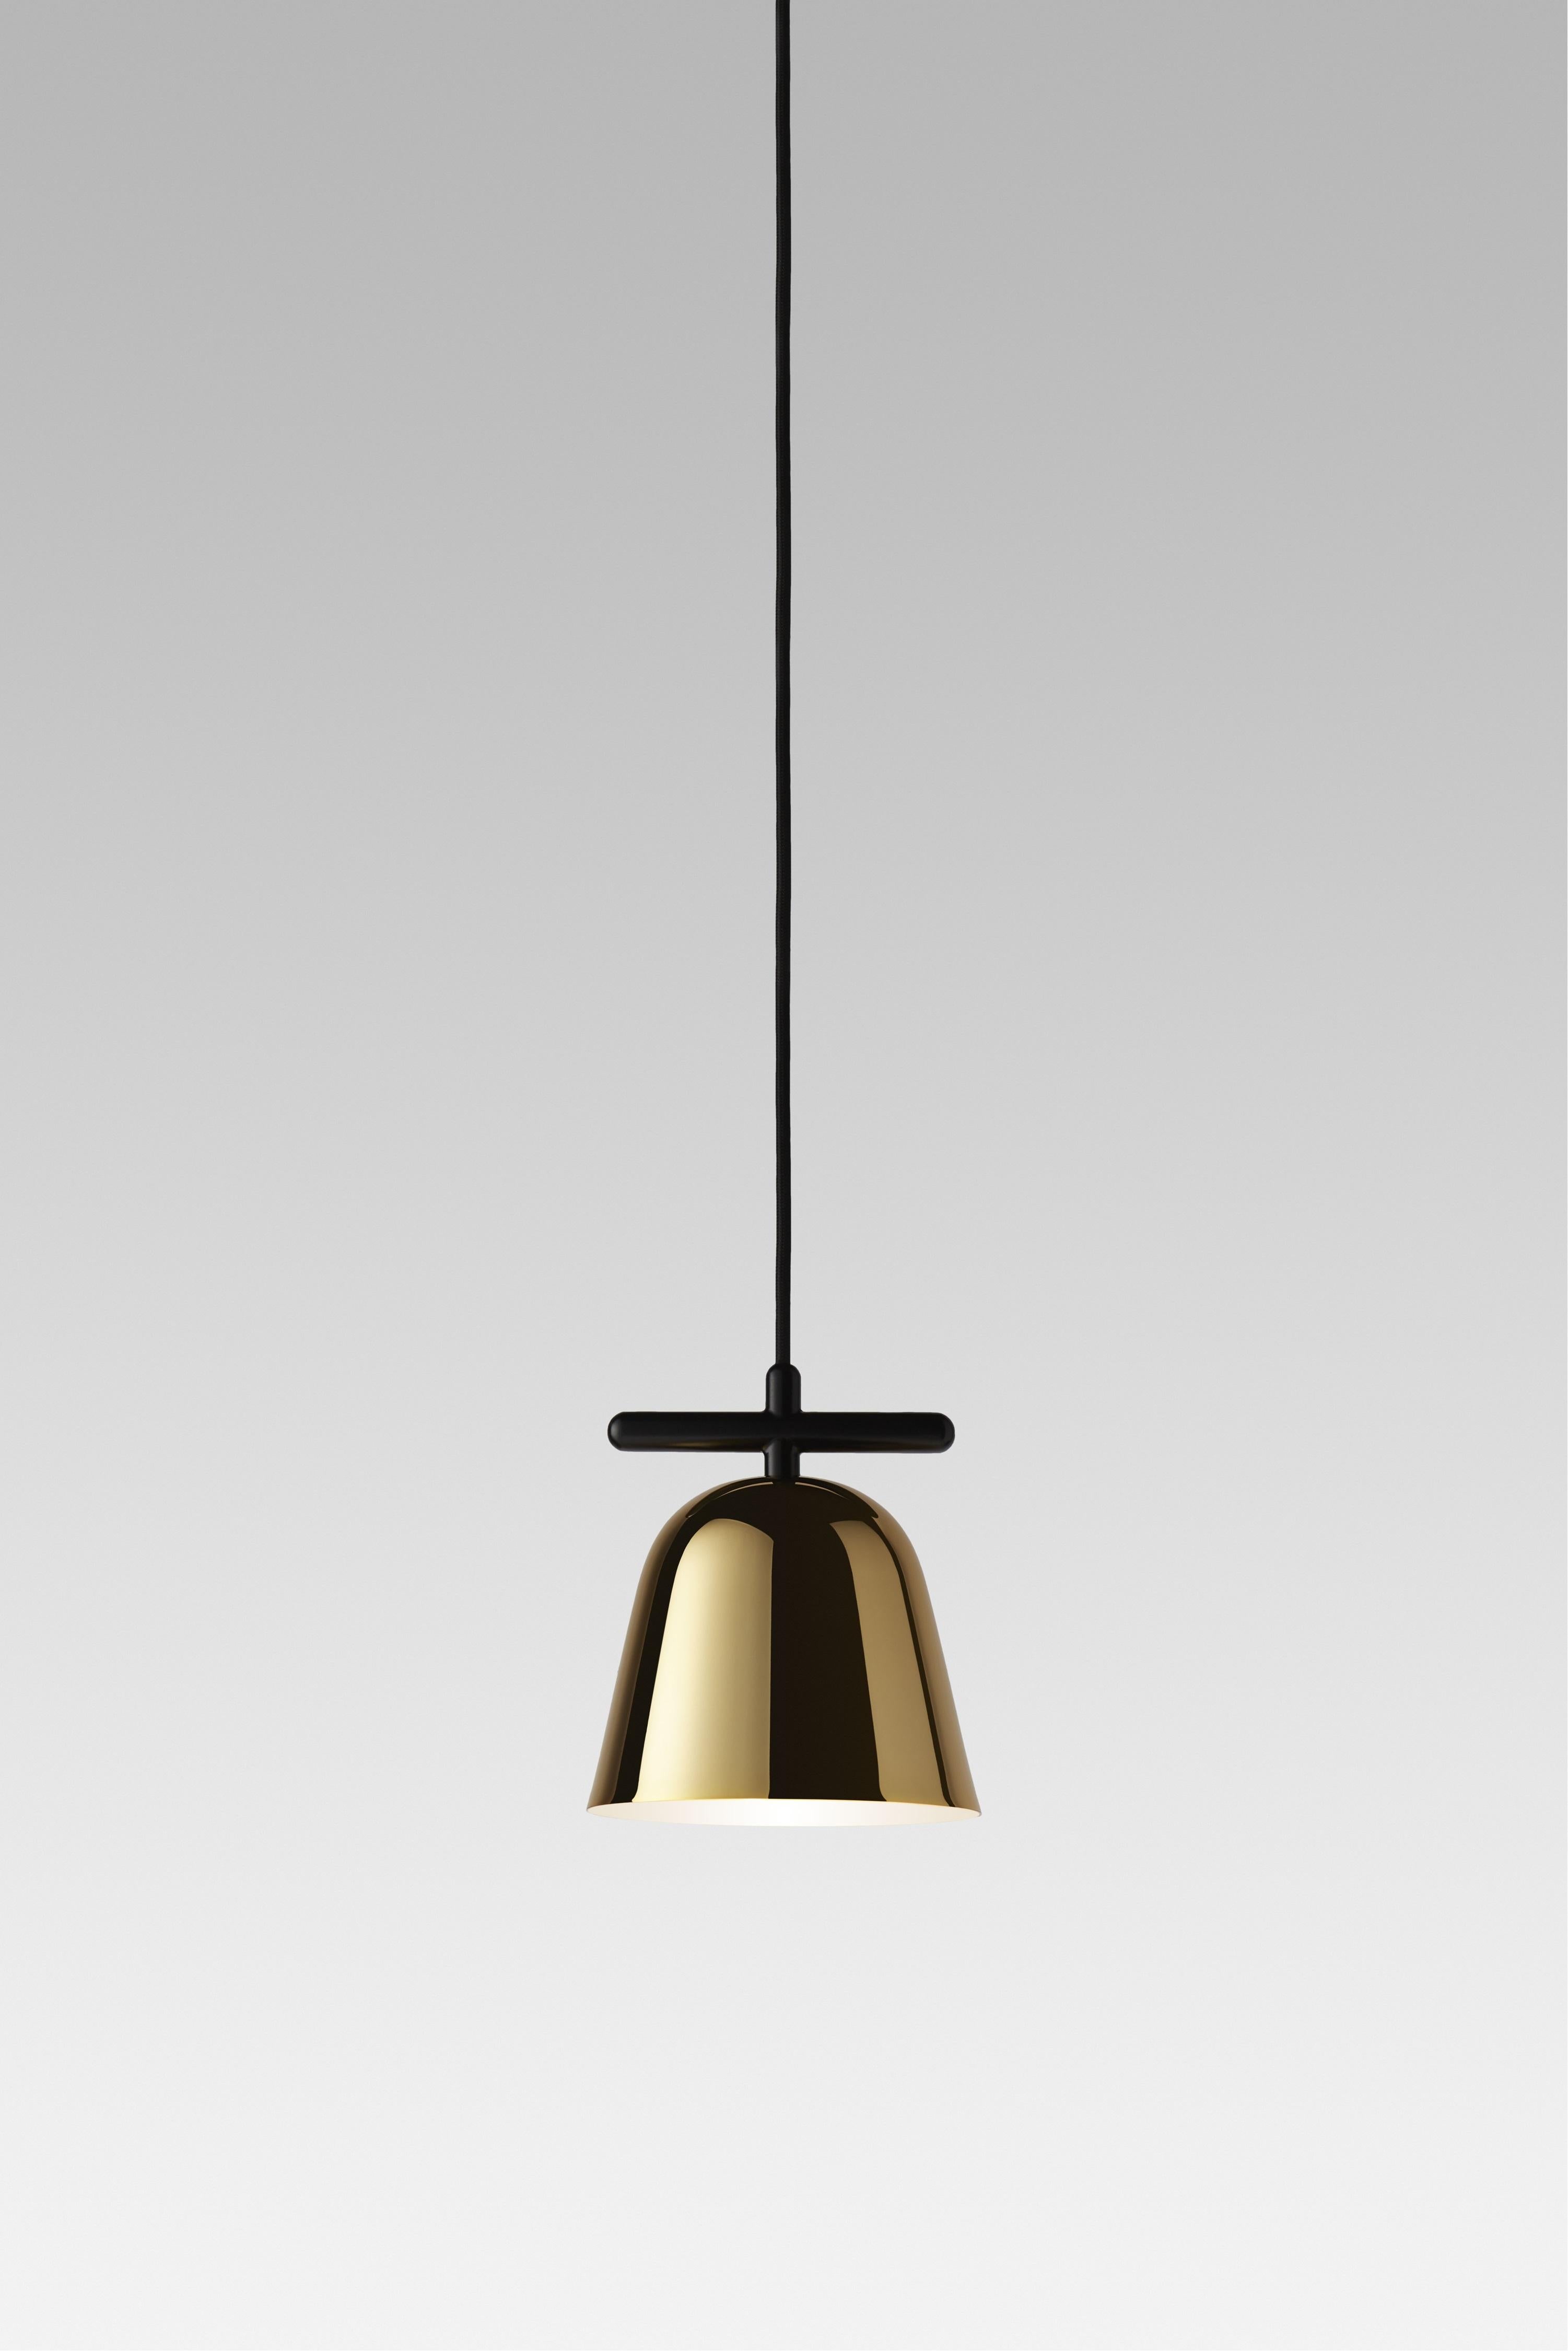 Lighto T GR by Jaime Hayon

This is a skinny yet characteristic collection. So simple yet so unique, with stunning finishes.

Suspension lamp. Structure in black matt lacquered steel. Dome in golden glossy or black chrome electroplated. Cob led unit